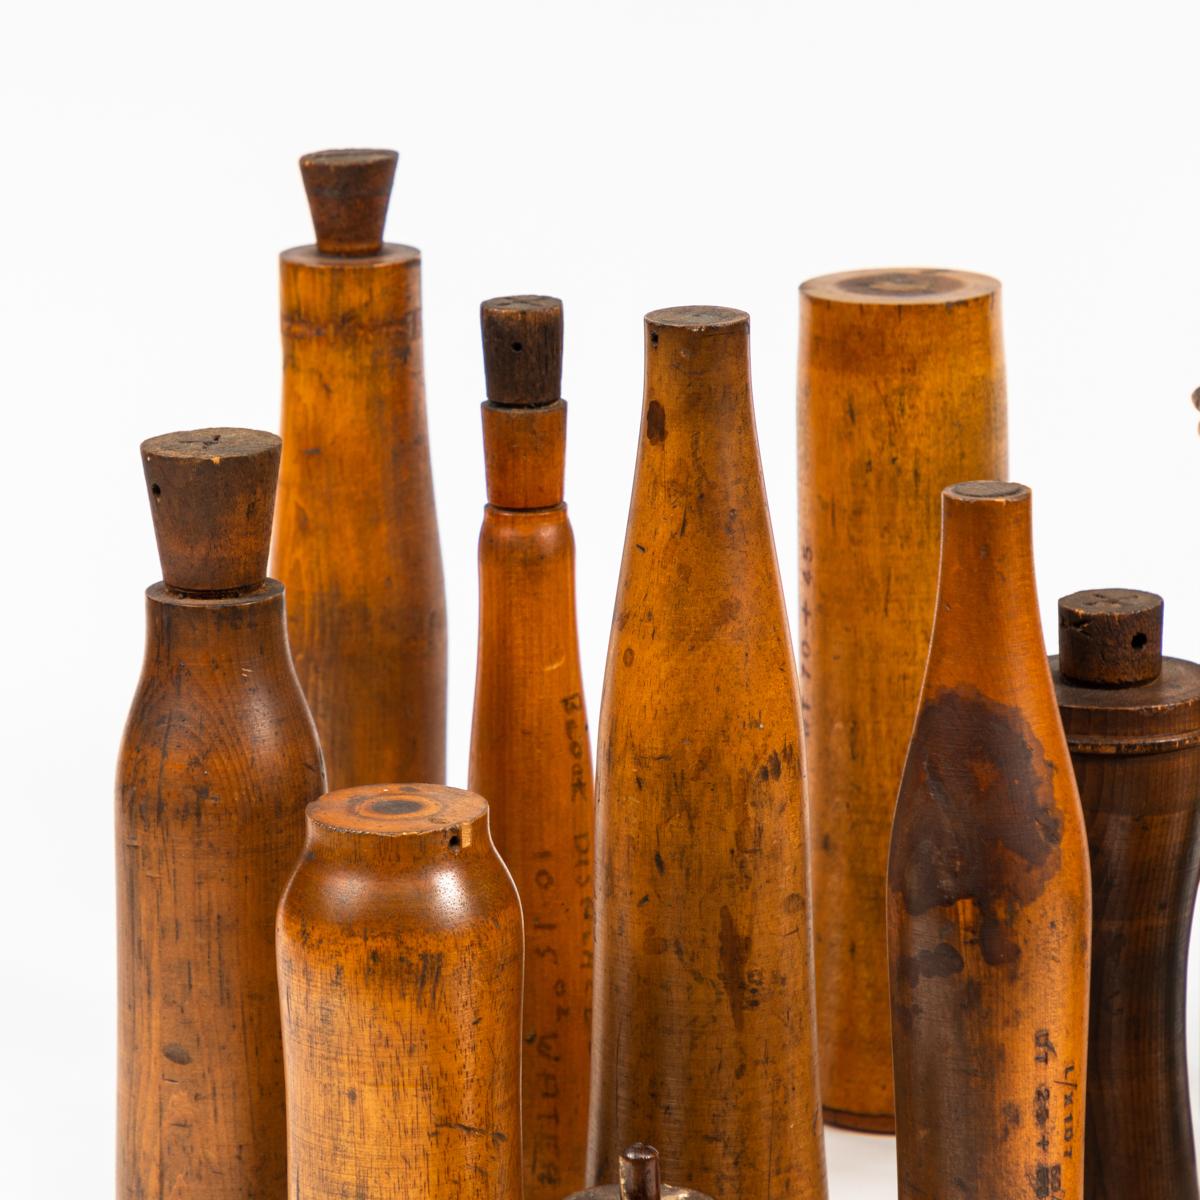 Collection of early 20th century wooden bottle molds from the John Lamb and Co. Glassworks in Castlelford, West Yorkshire. (13 pieces).